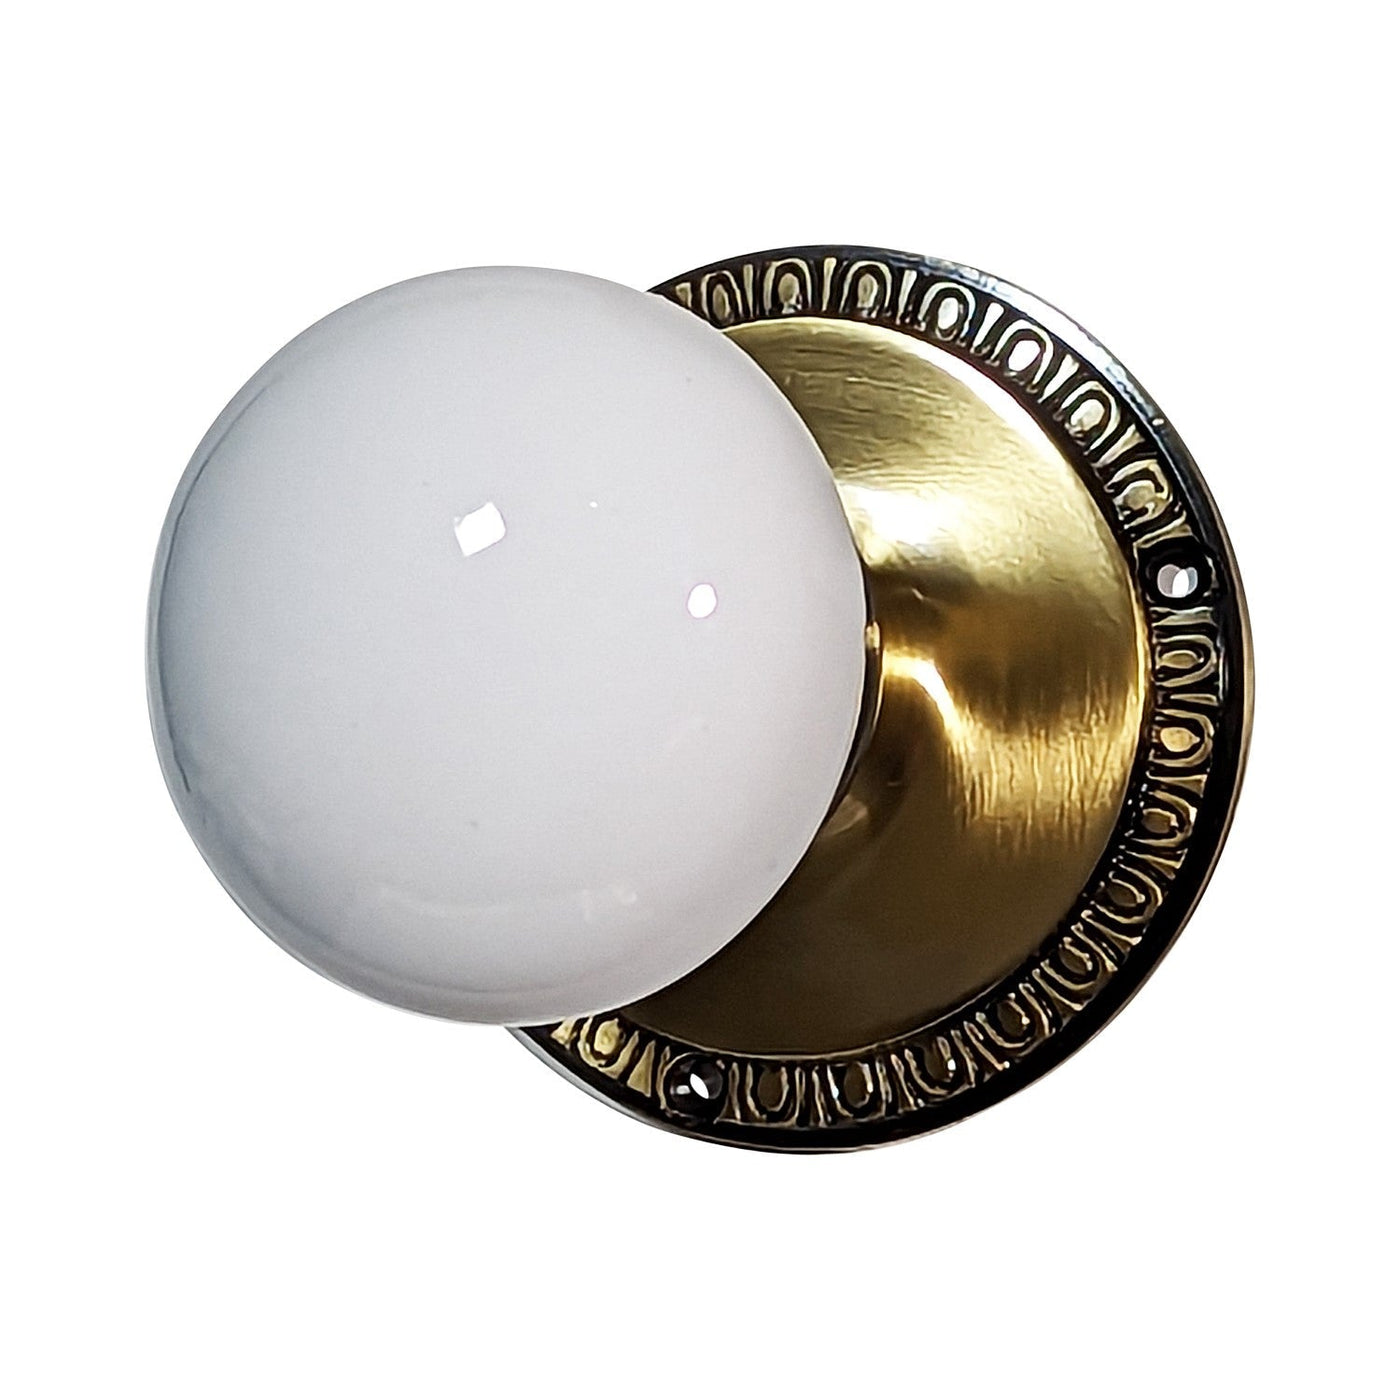 White Porcelain Door Knob with Egg & Dart Plate (Several Finishes Available)